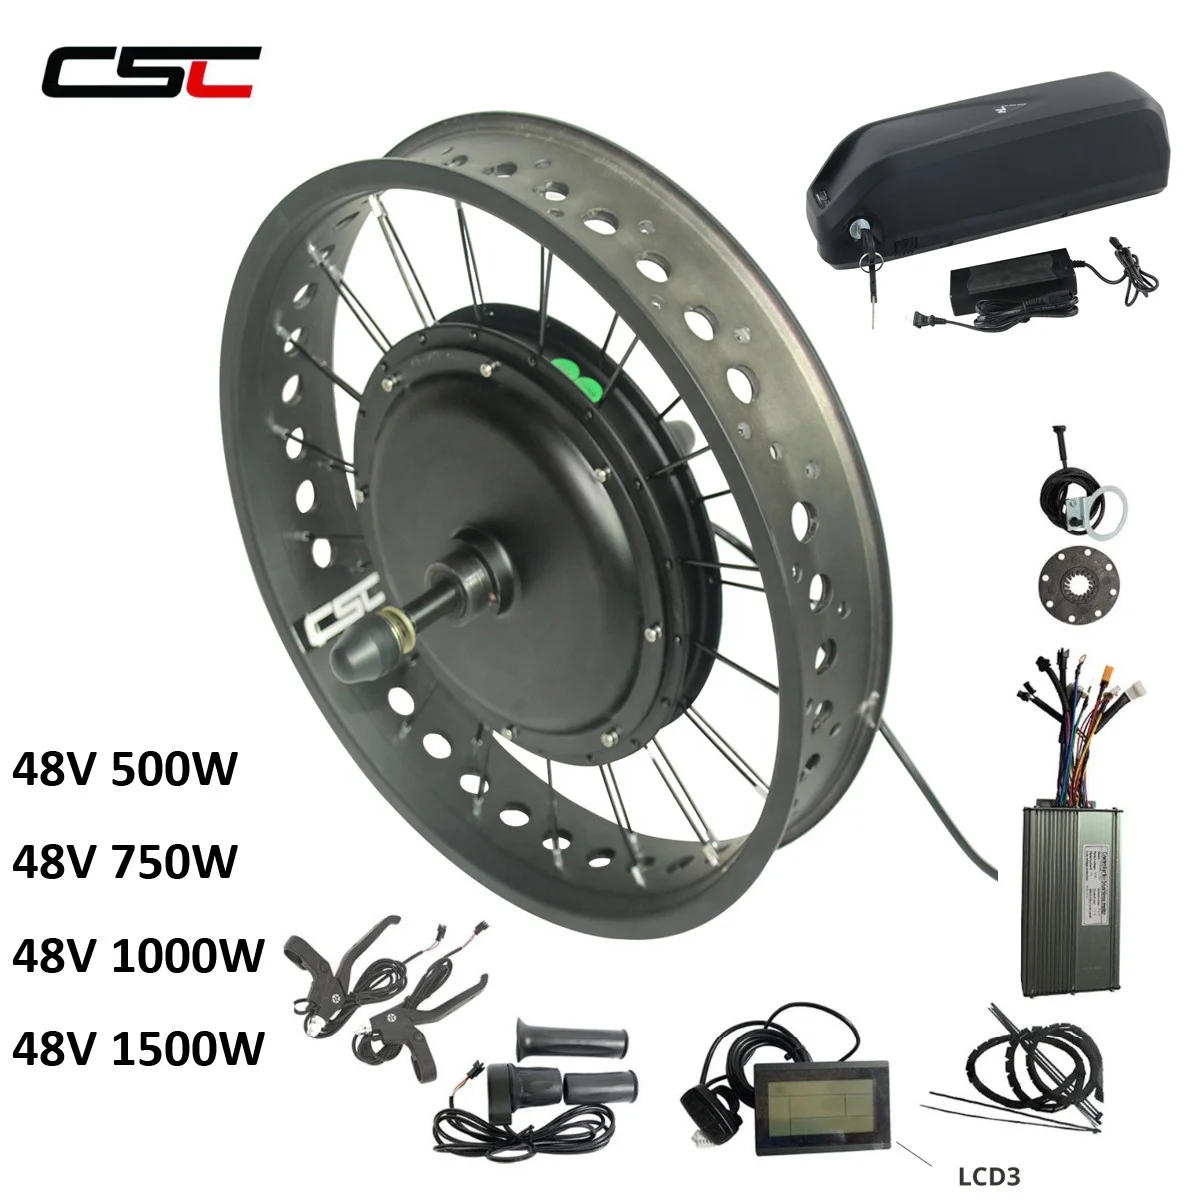 Big Promotion 48V 1500W Electric Fat Tyre bike Kit Brushless Hub Motor Rear Snow Wheel 1500W bicycle Conversion Kit with battery